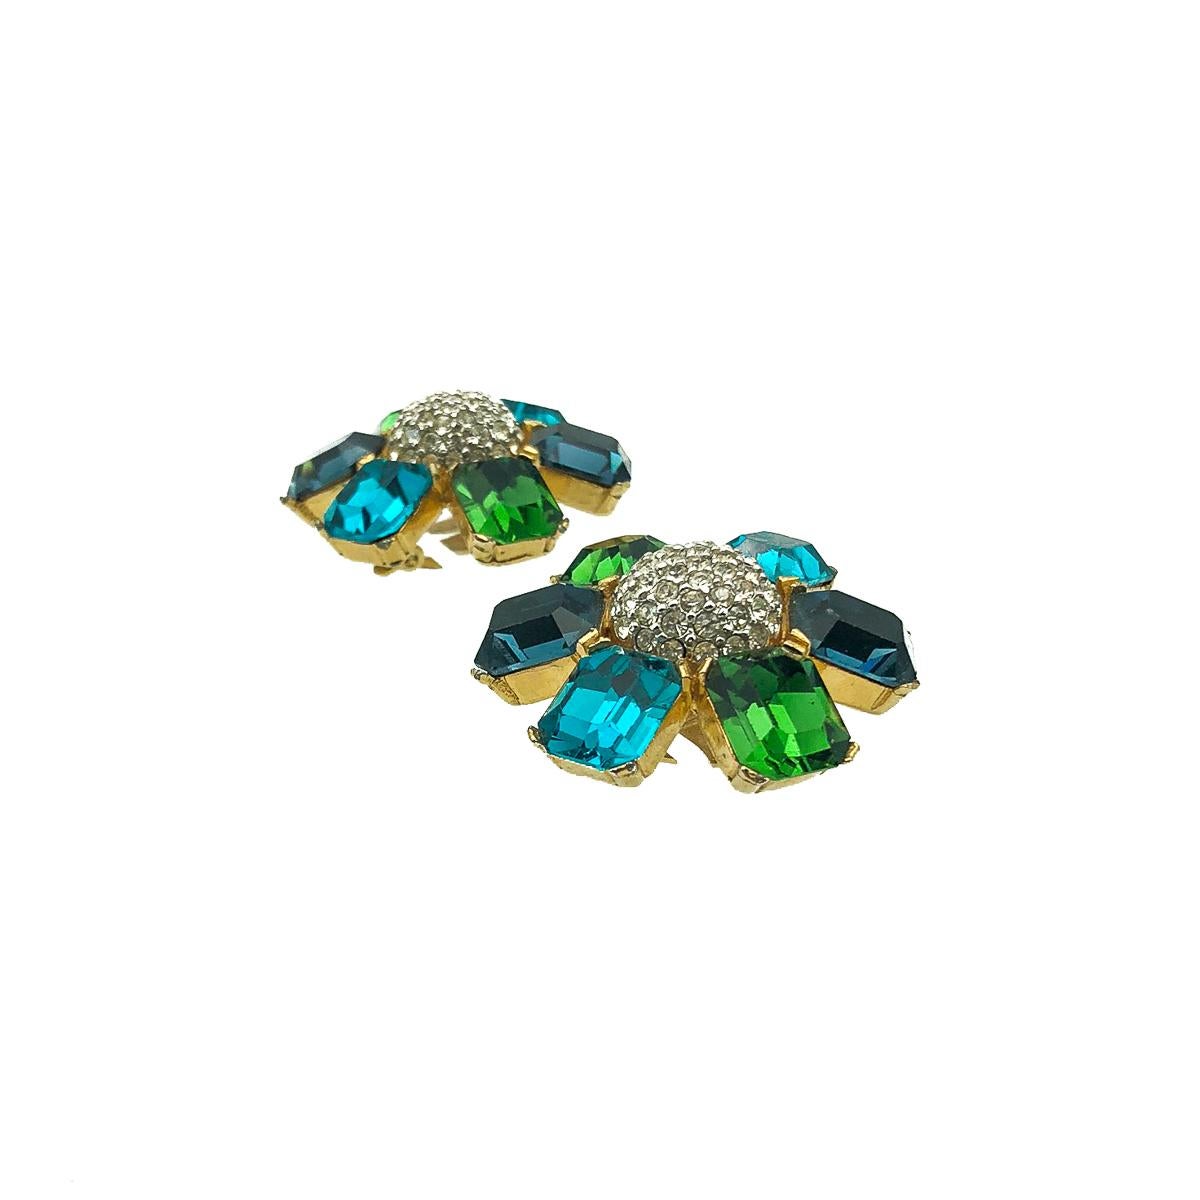 Vintage Ciner Flower Earrings. Crafted in gold plated metal and featuring a sumptuous display of large emerald cut crystals in dark green, deep blue and turquoise. Finished with a central dome of small pave set chatons. Very good vintage condition,